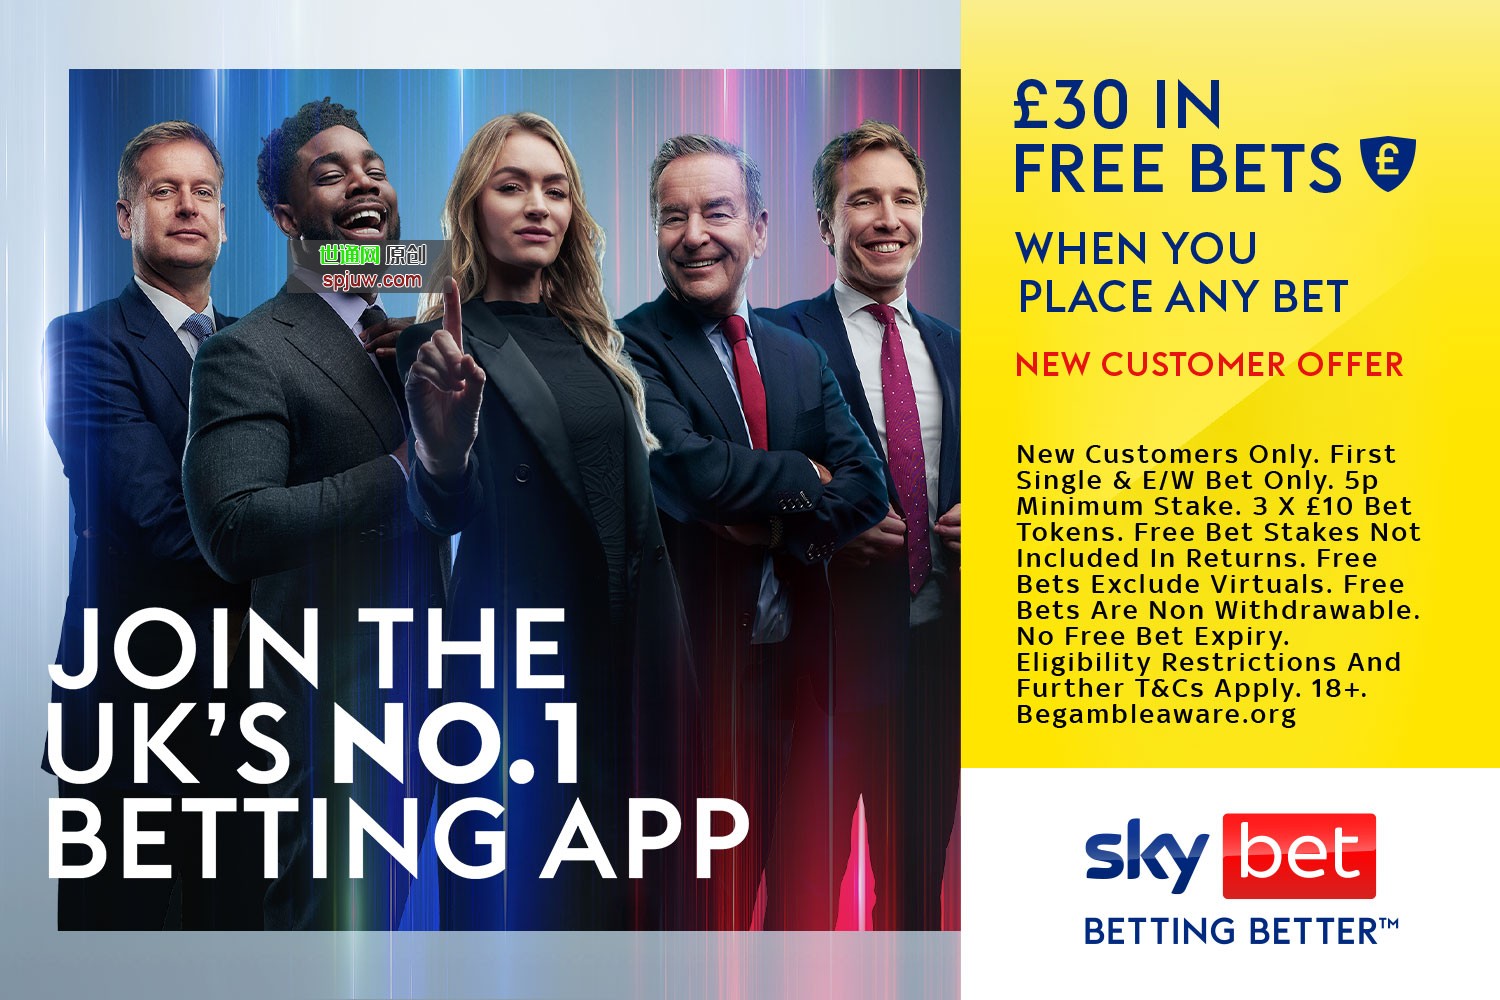 Get £30 in FREE BETS when you stake anything with Sky Bet special offer!